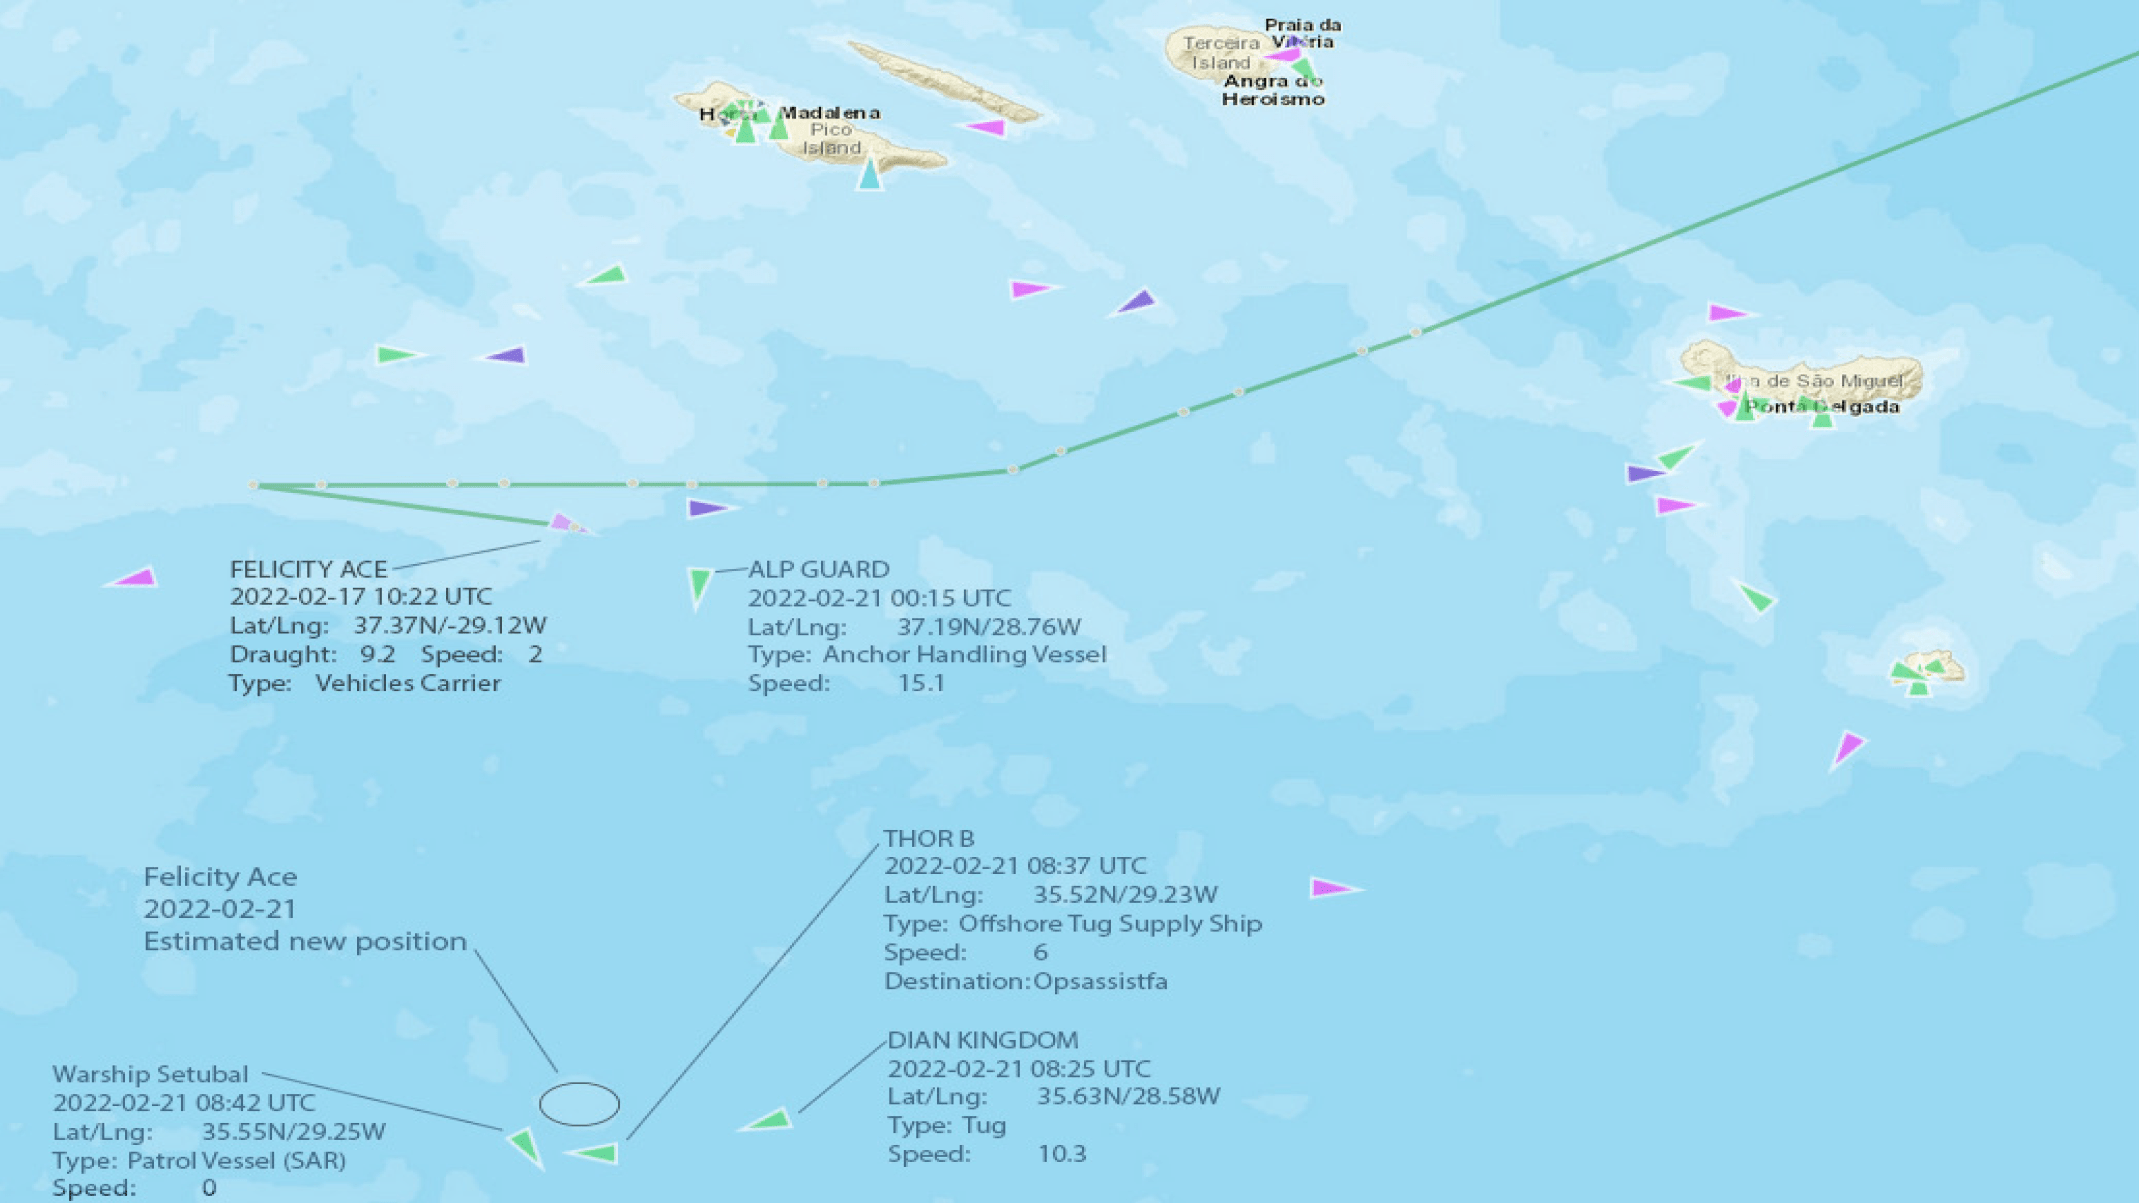 Estimated drifting position of Felicity Ace